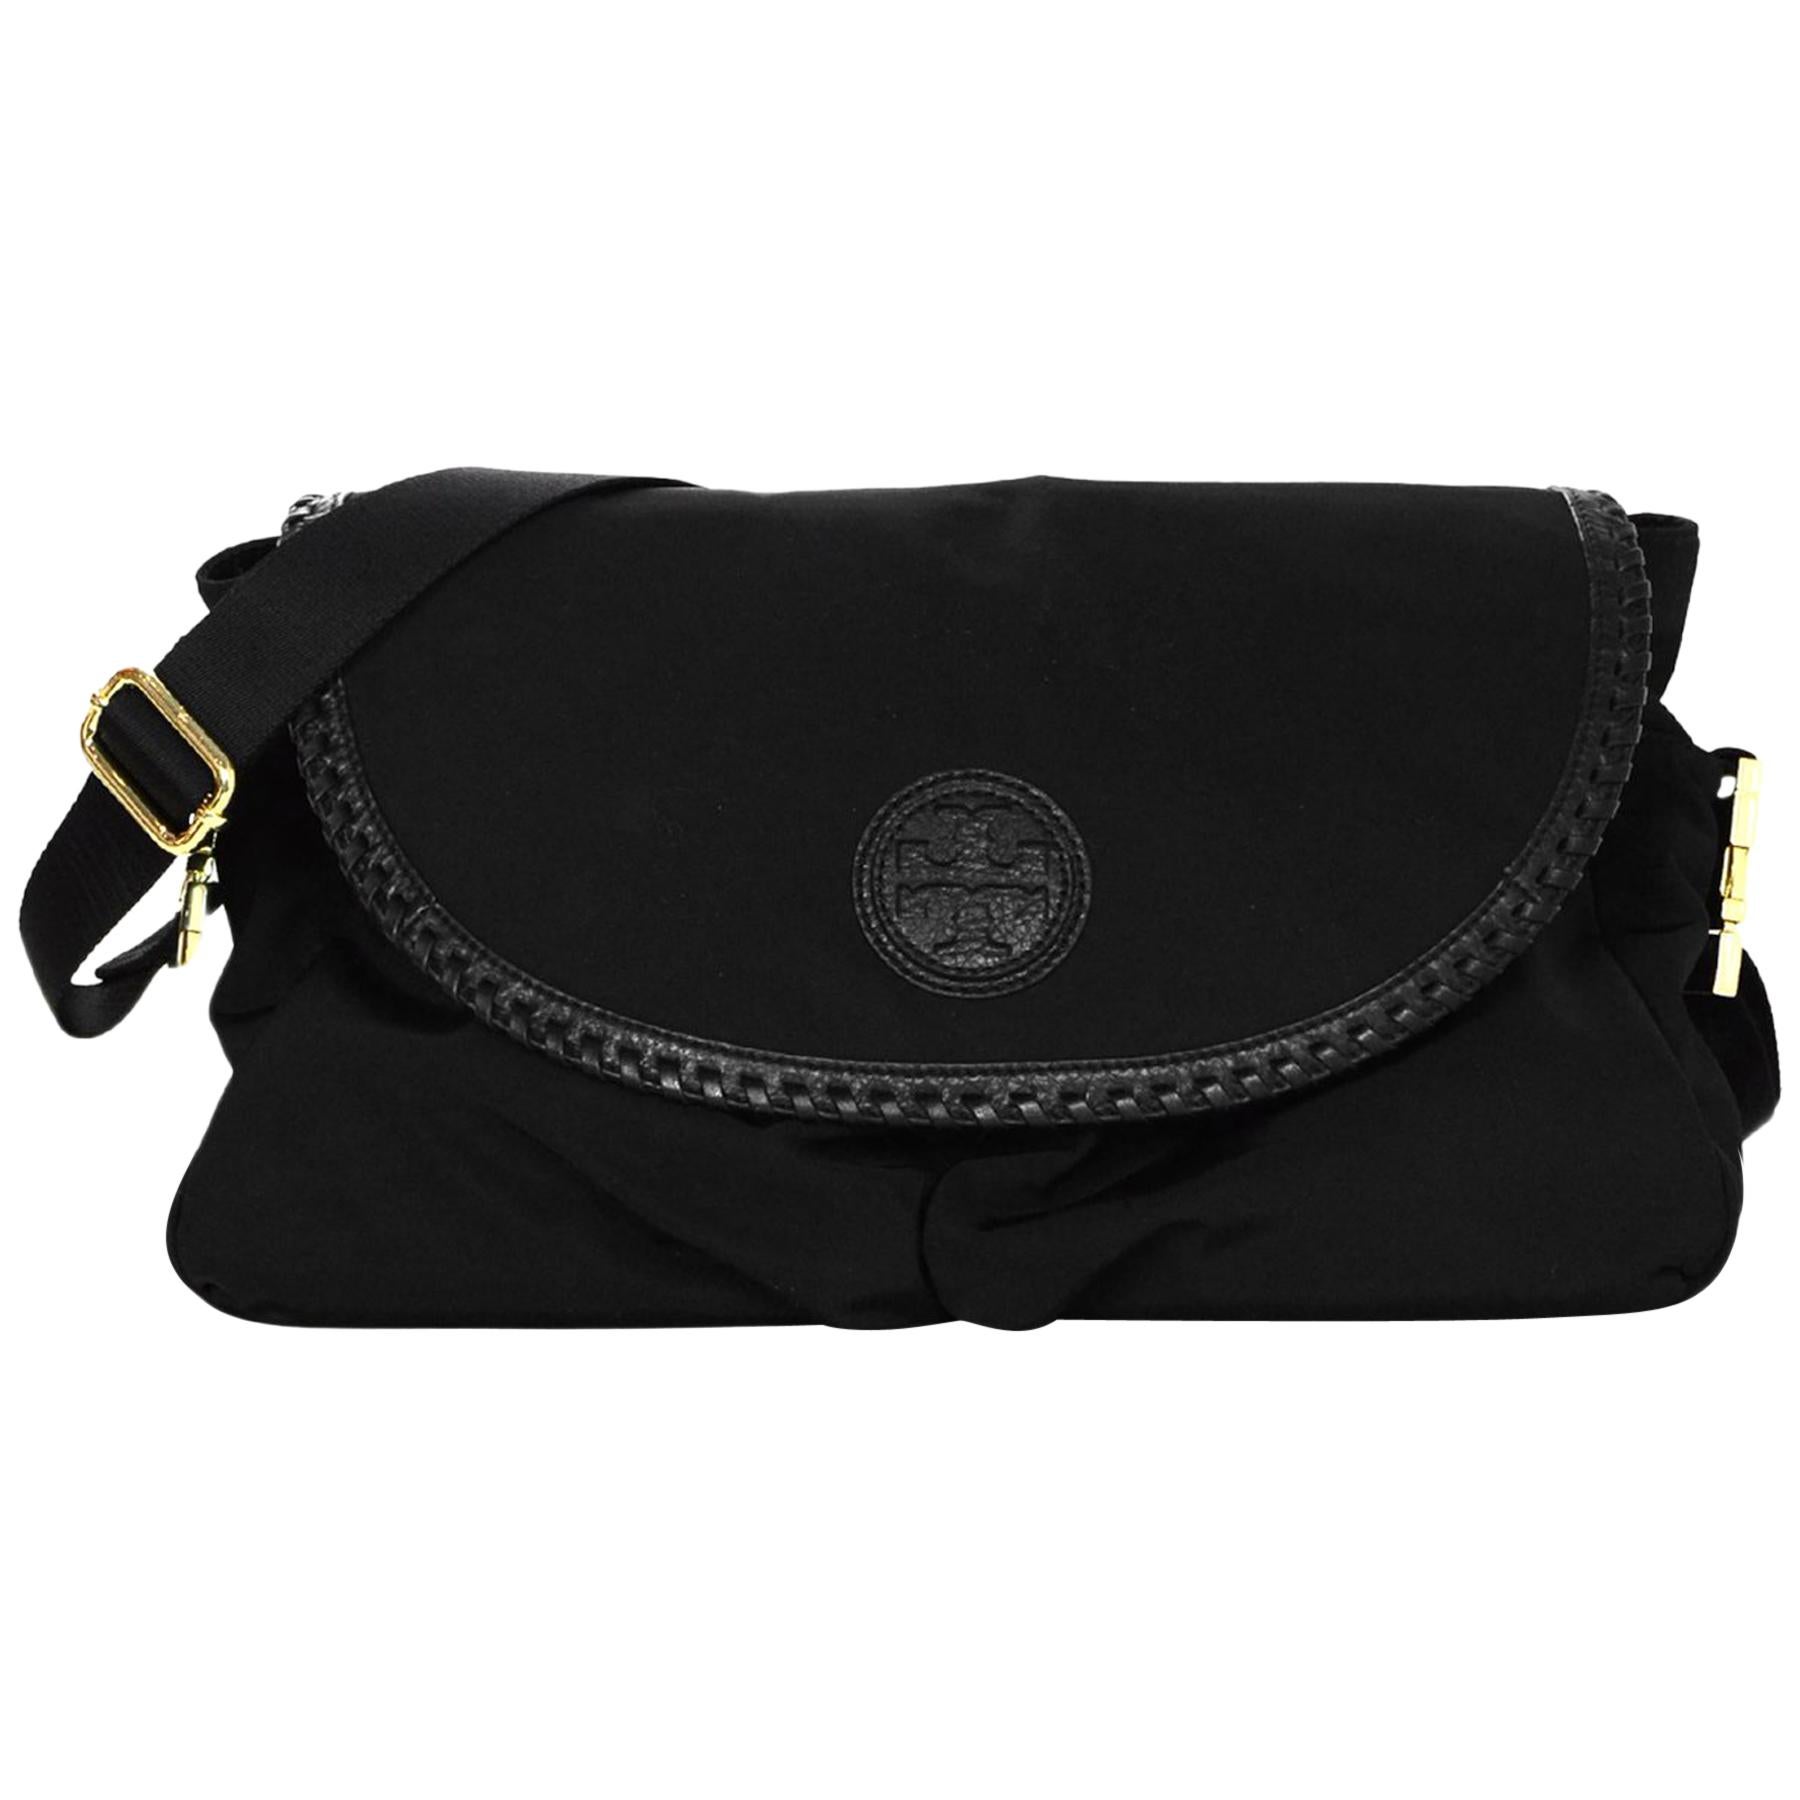 Tory Burch Black Nylon/Leather Whipstitch Trim Marion Diaper Bag W/ Changing Pad